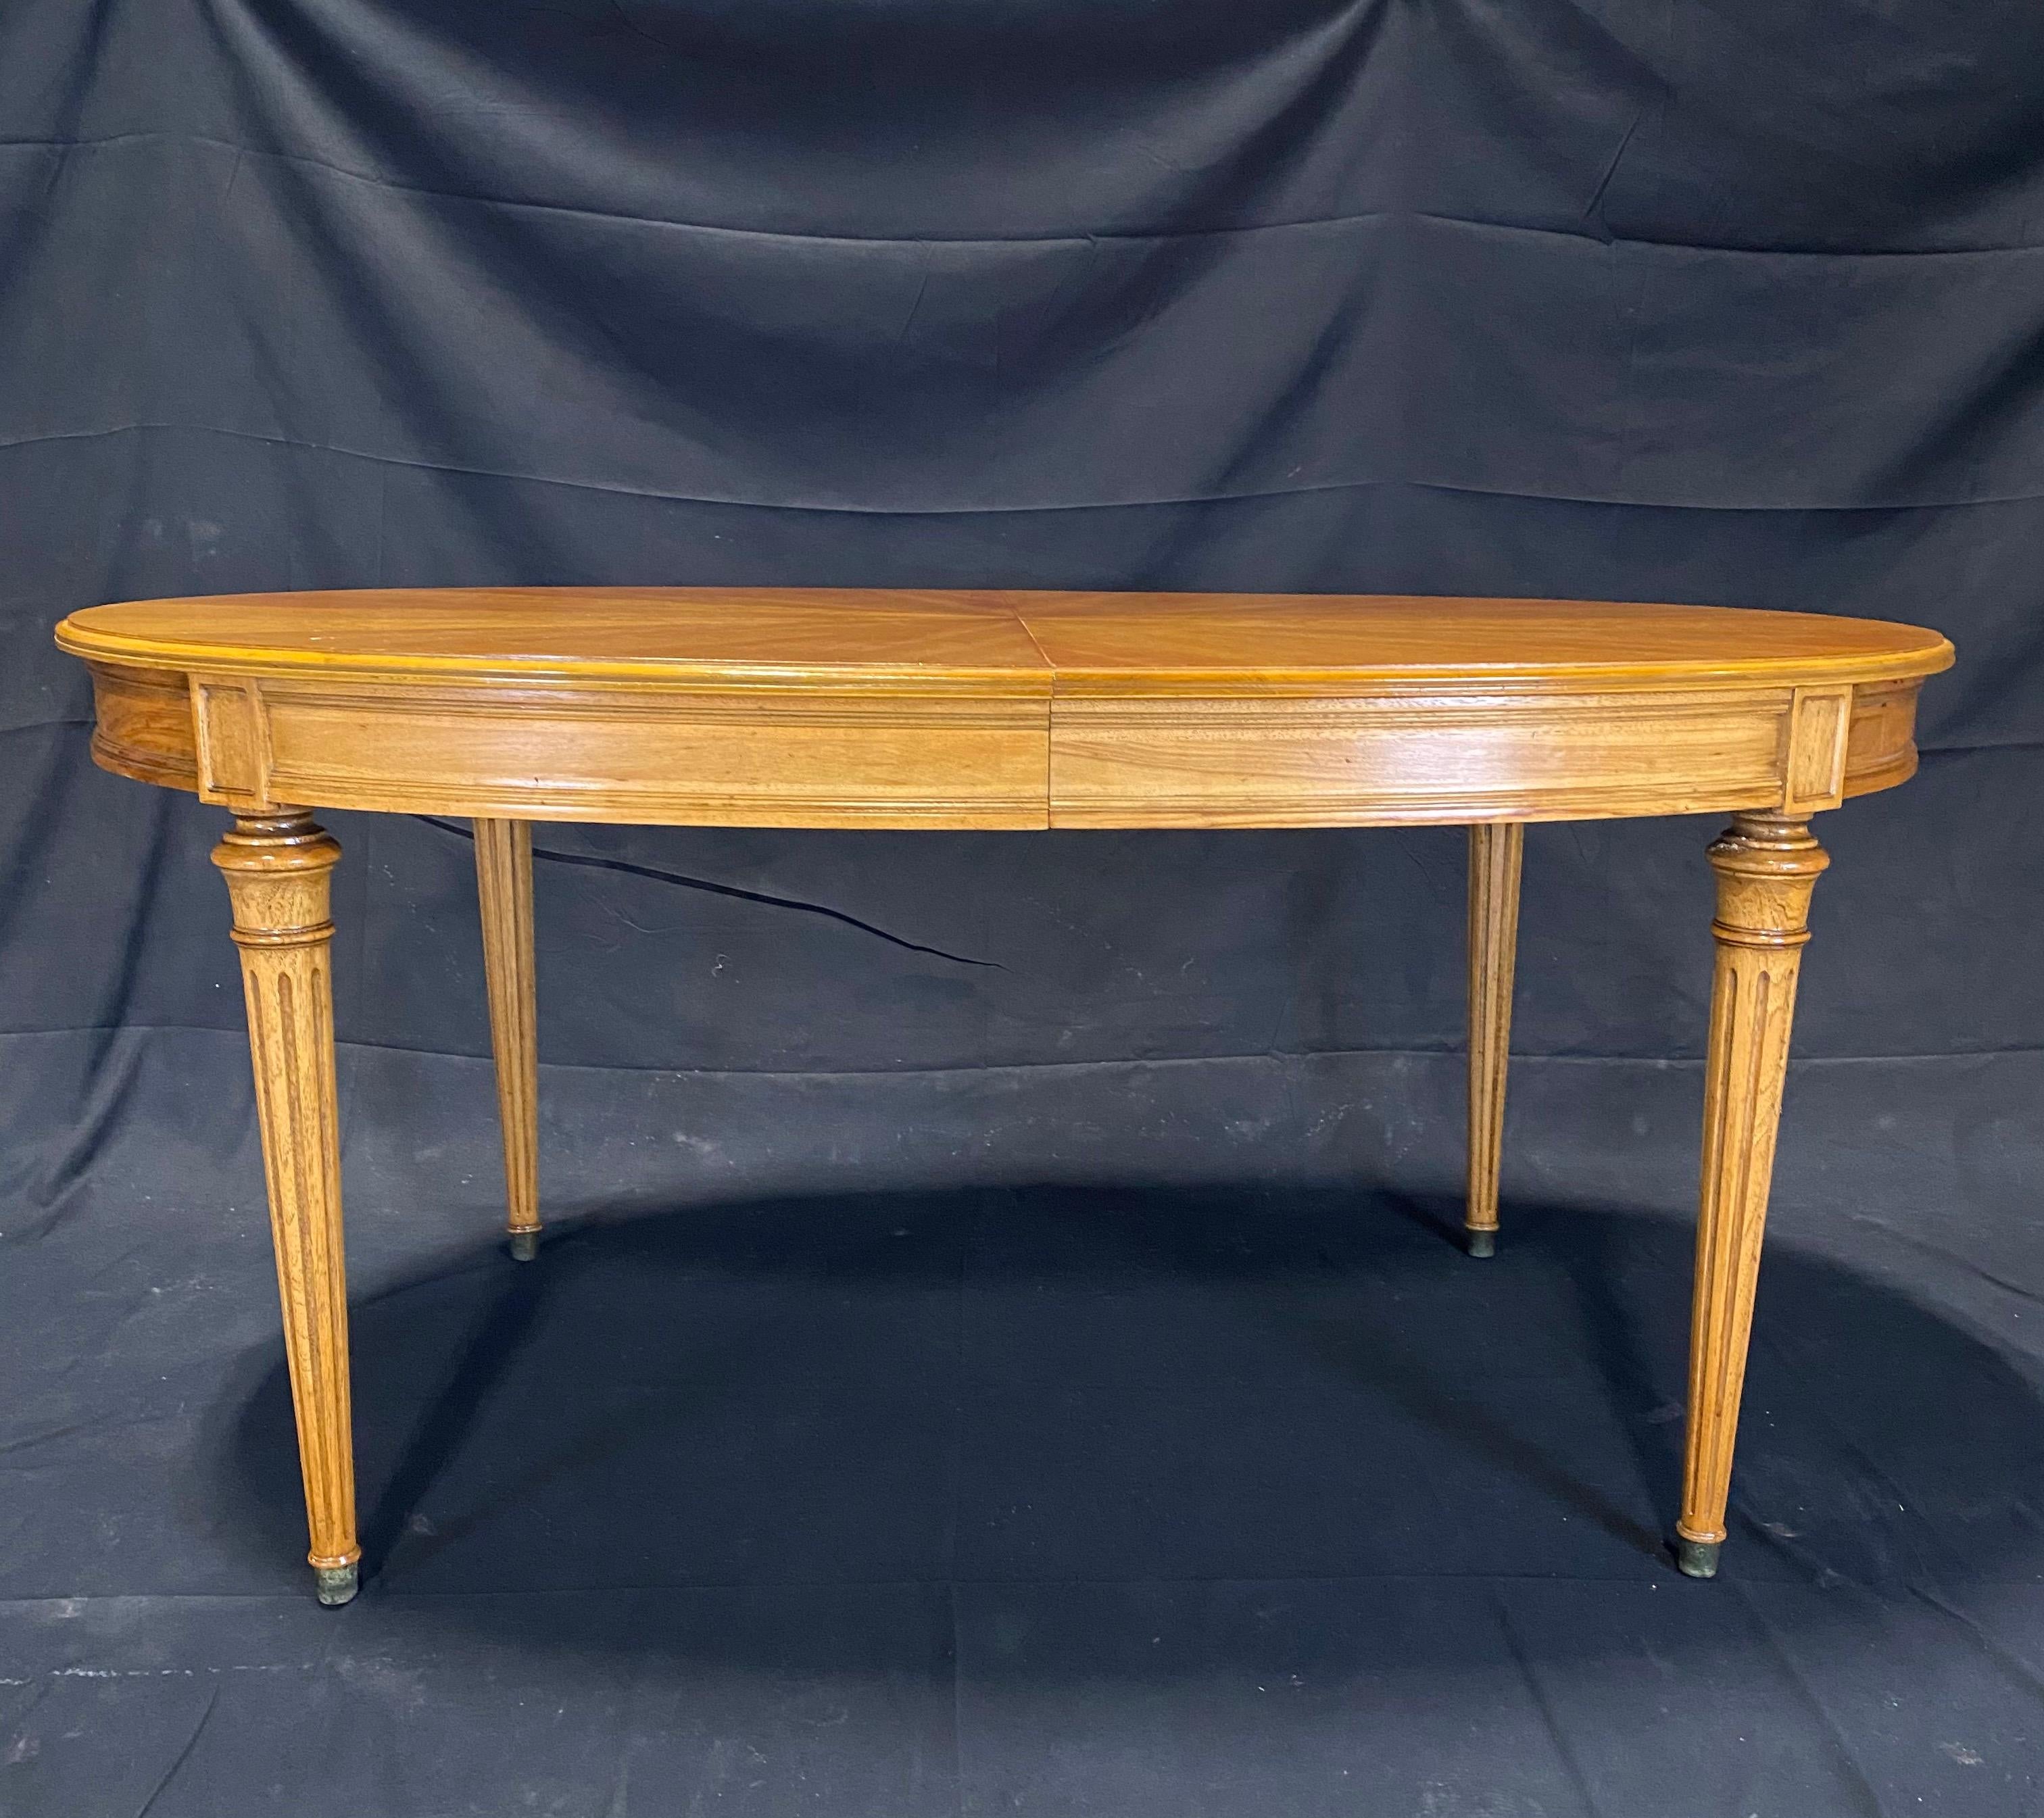 Gorgeous French Louis XVI Style Dining Table with Sunburst Top and Leaves 2